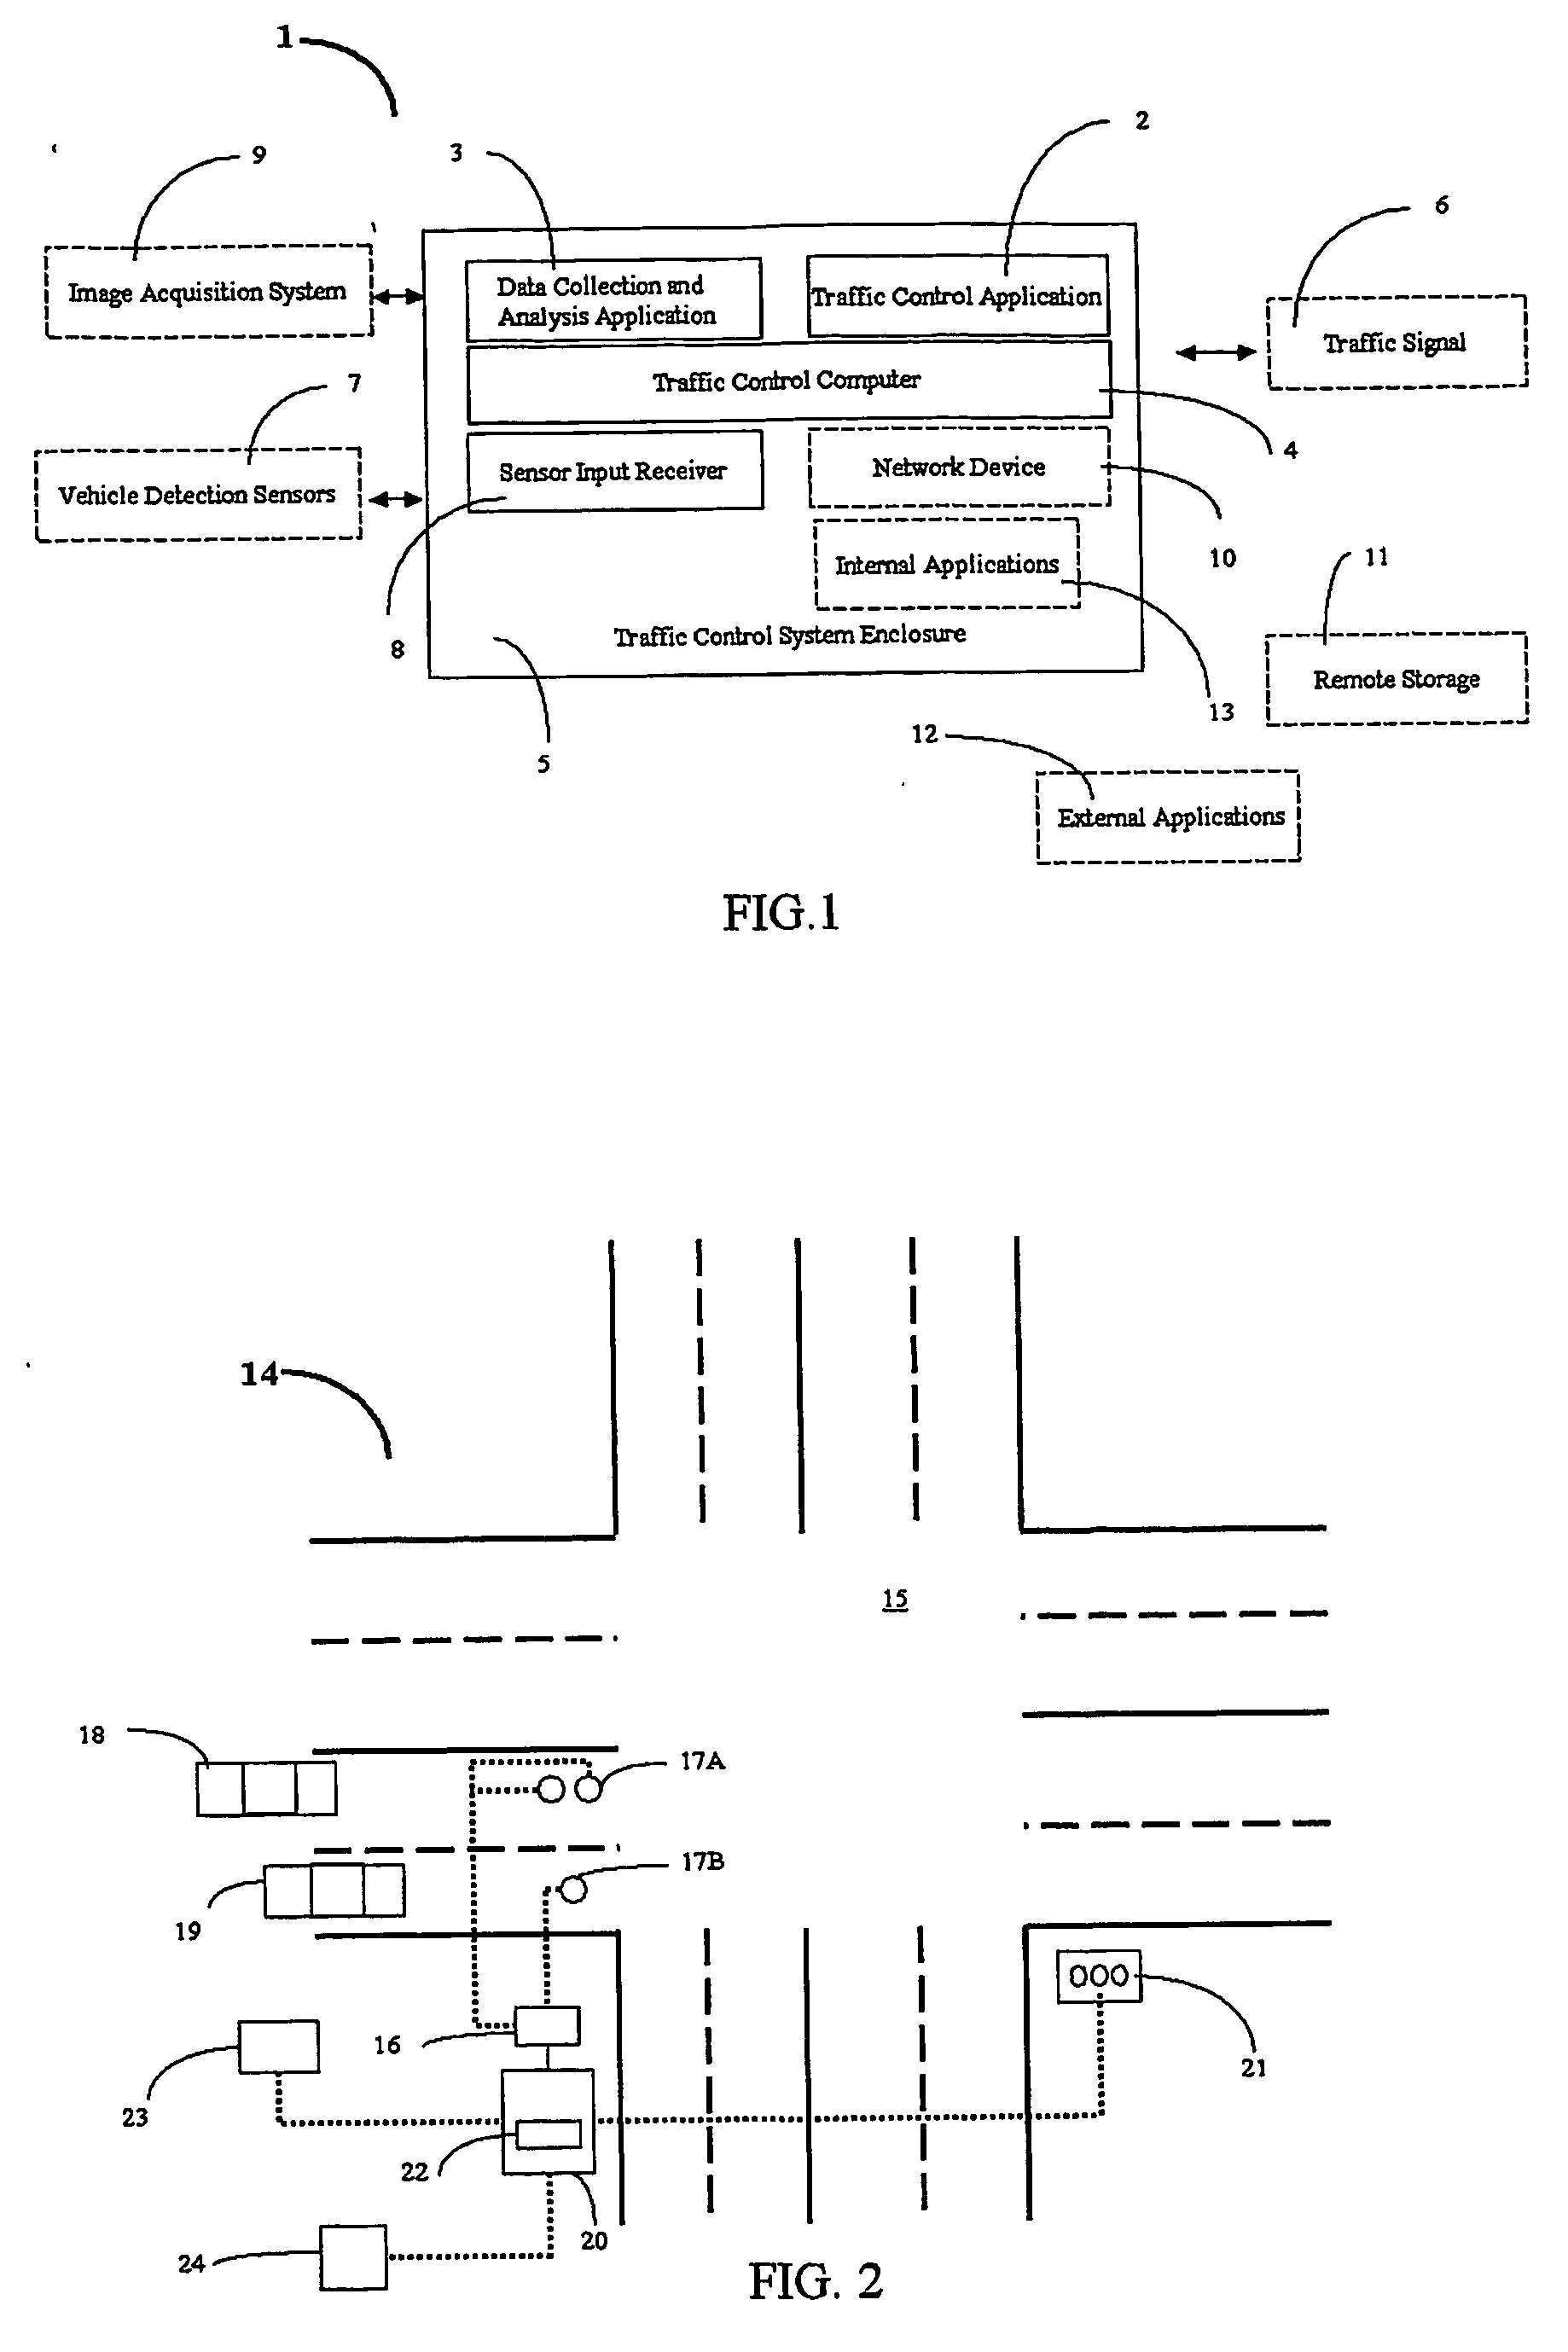 Method for incorporating individual vehicle data collection, detection and recording of traffic violations in a traffic signal controller